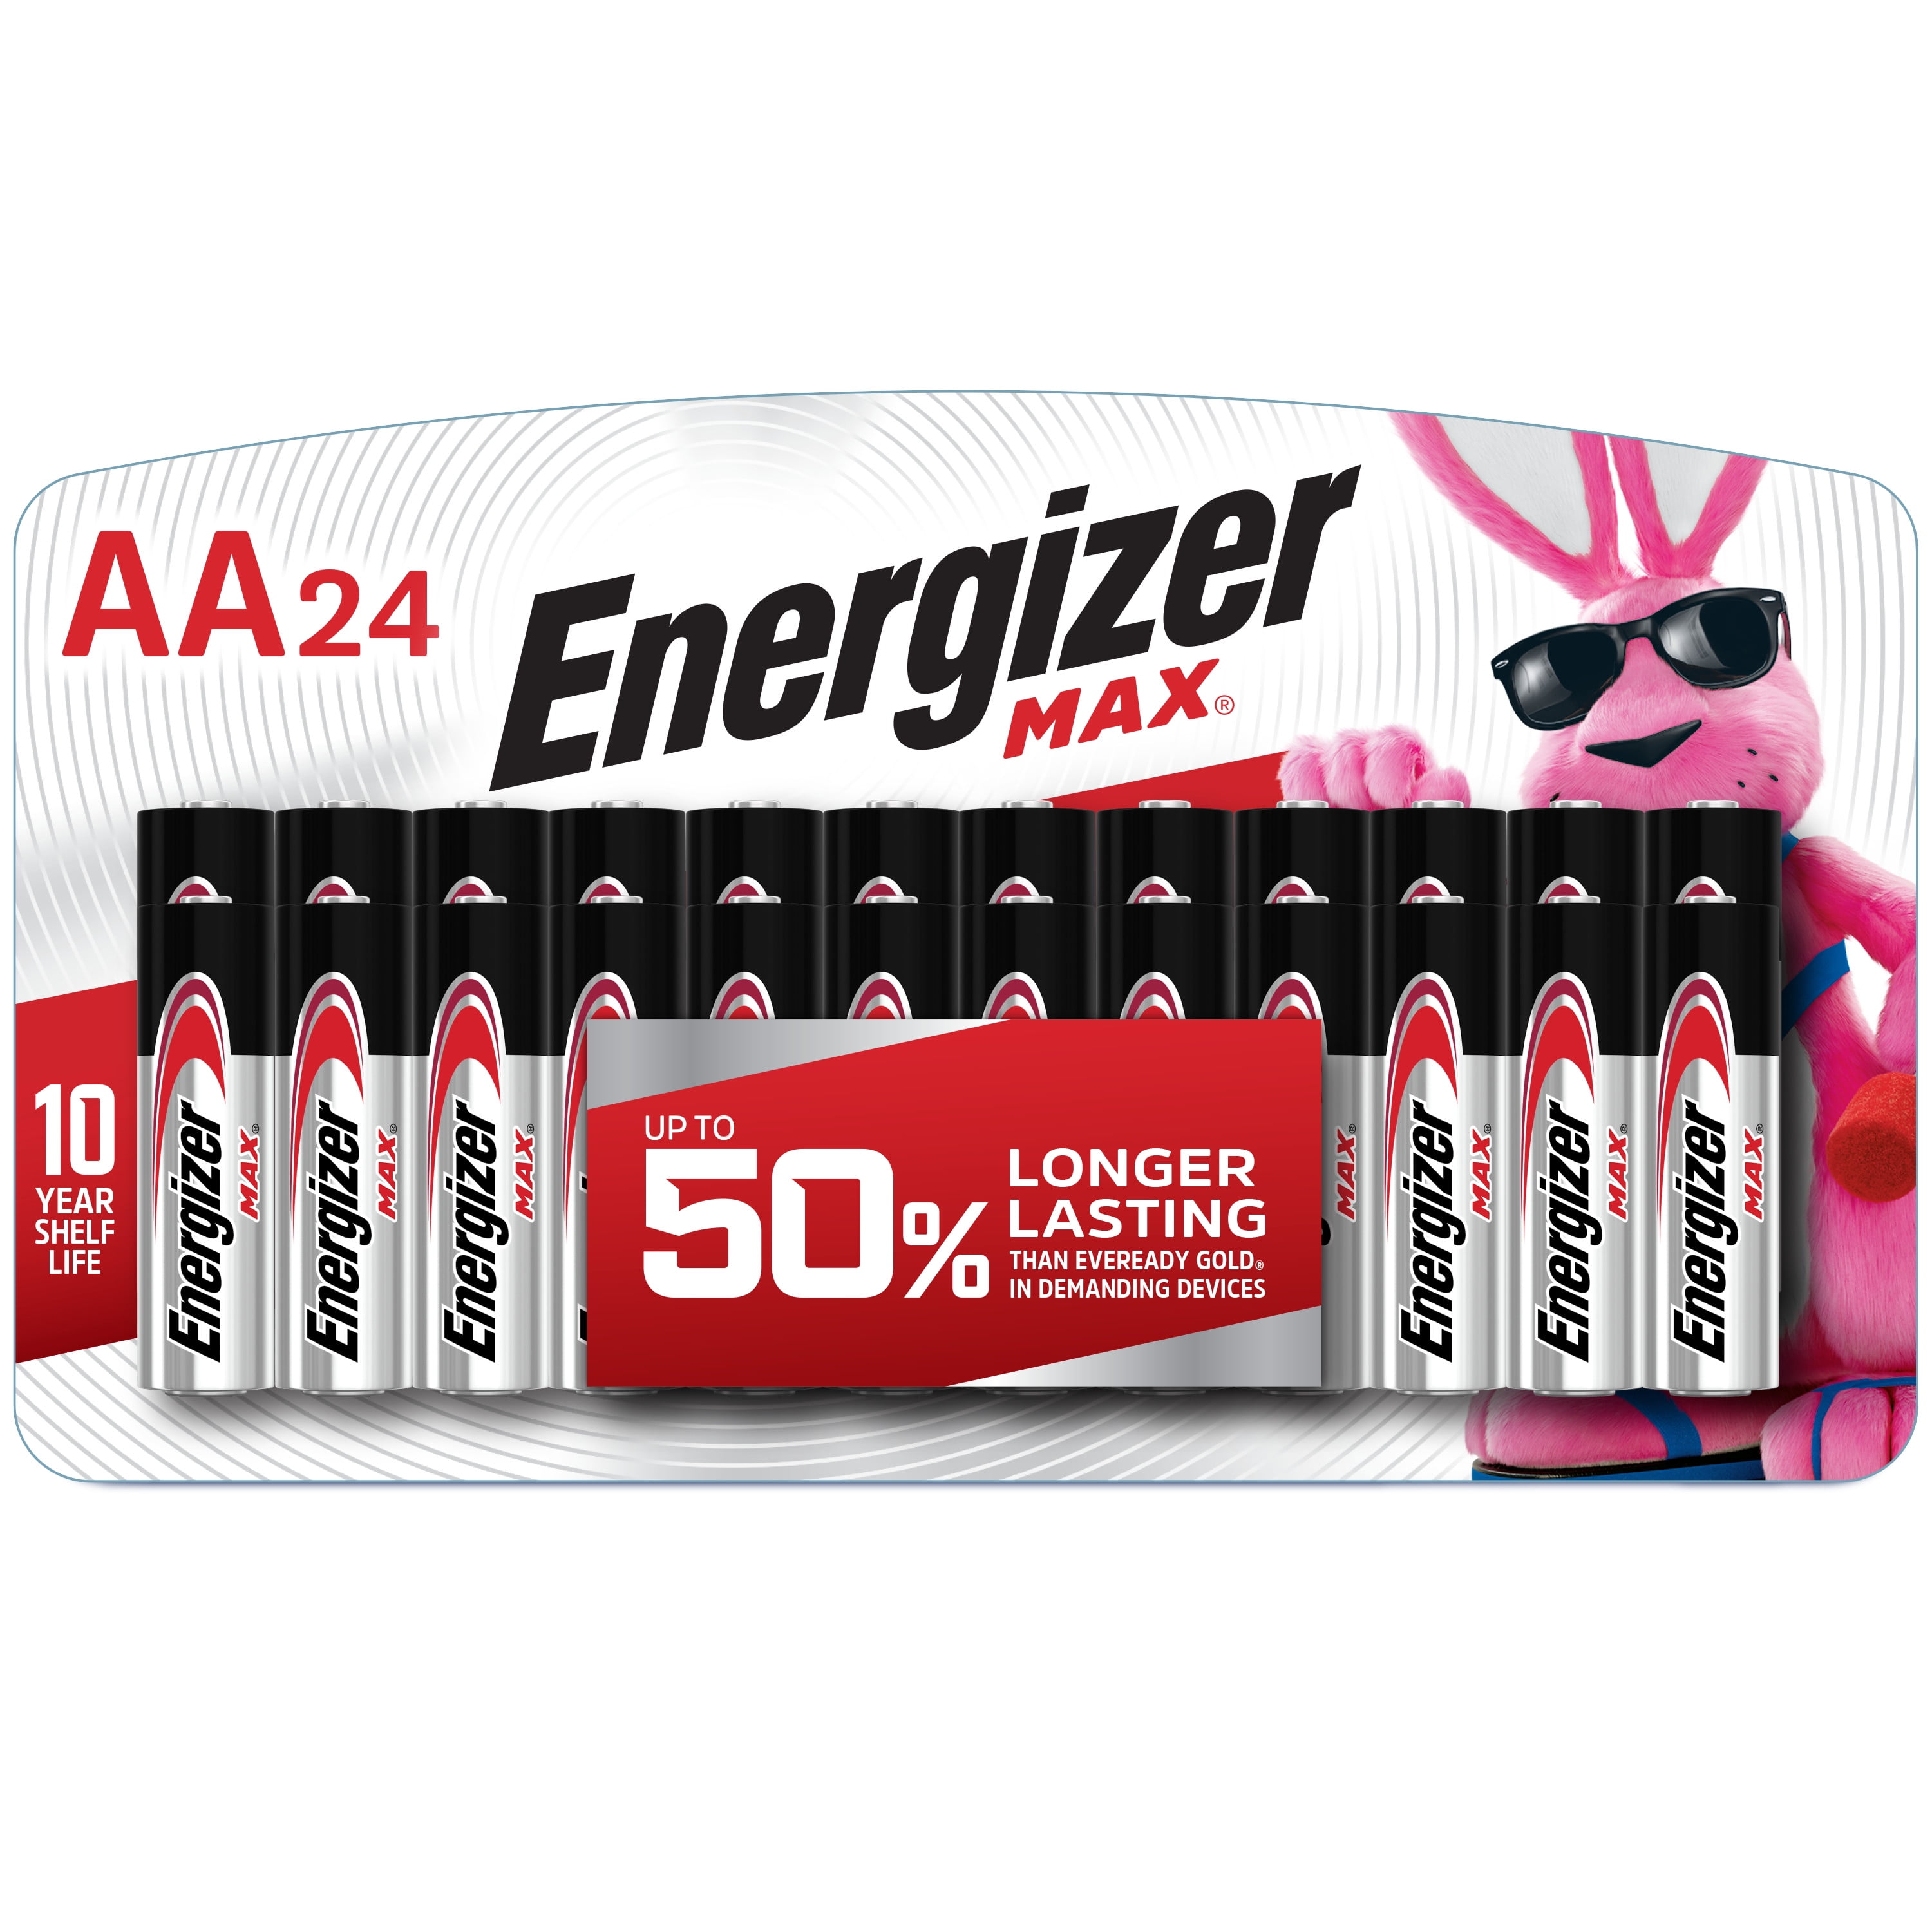 Energizer MAX AA Batteries A Pack), Batteries Alkaline Double (24